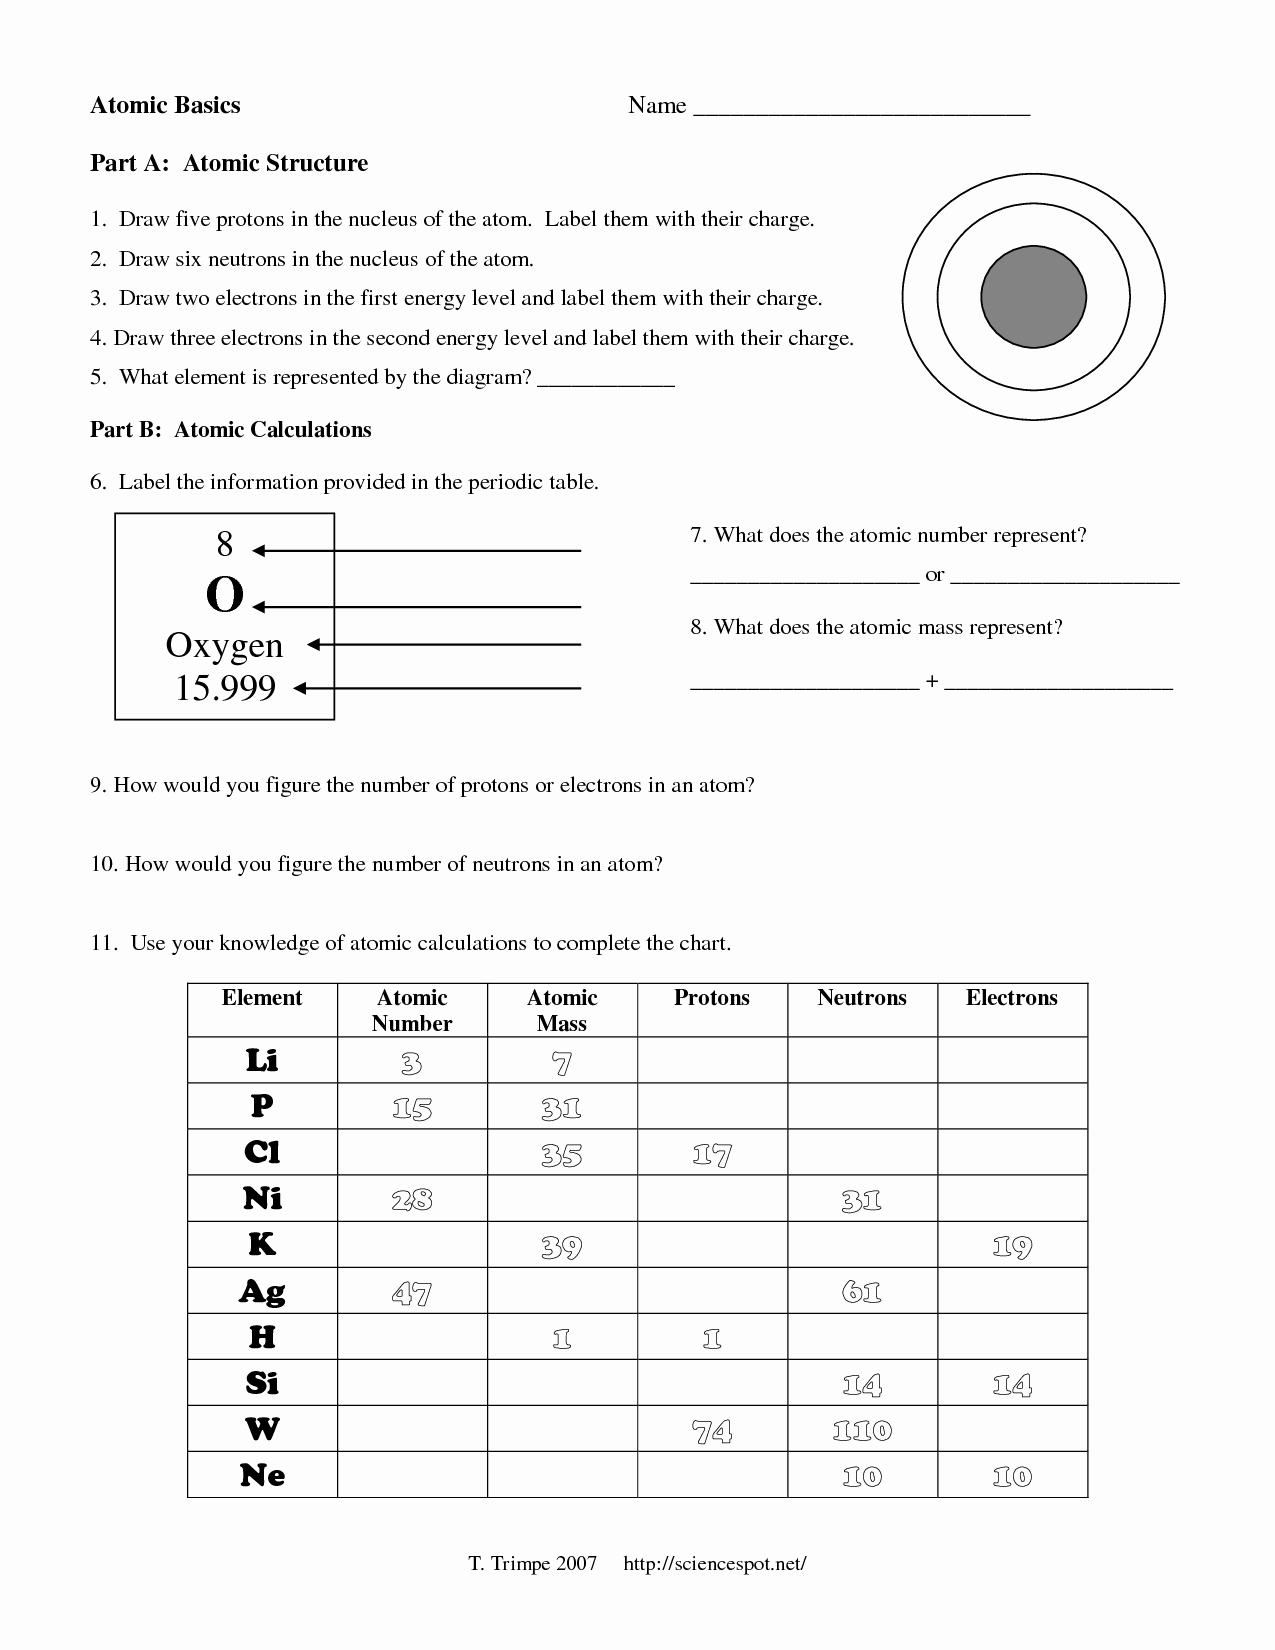 Structure Of the atom Worksheet Inspirational 12 Best Of Label An atom Worksheet Drawing atoms